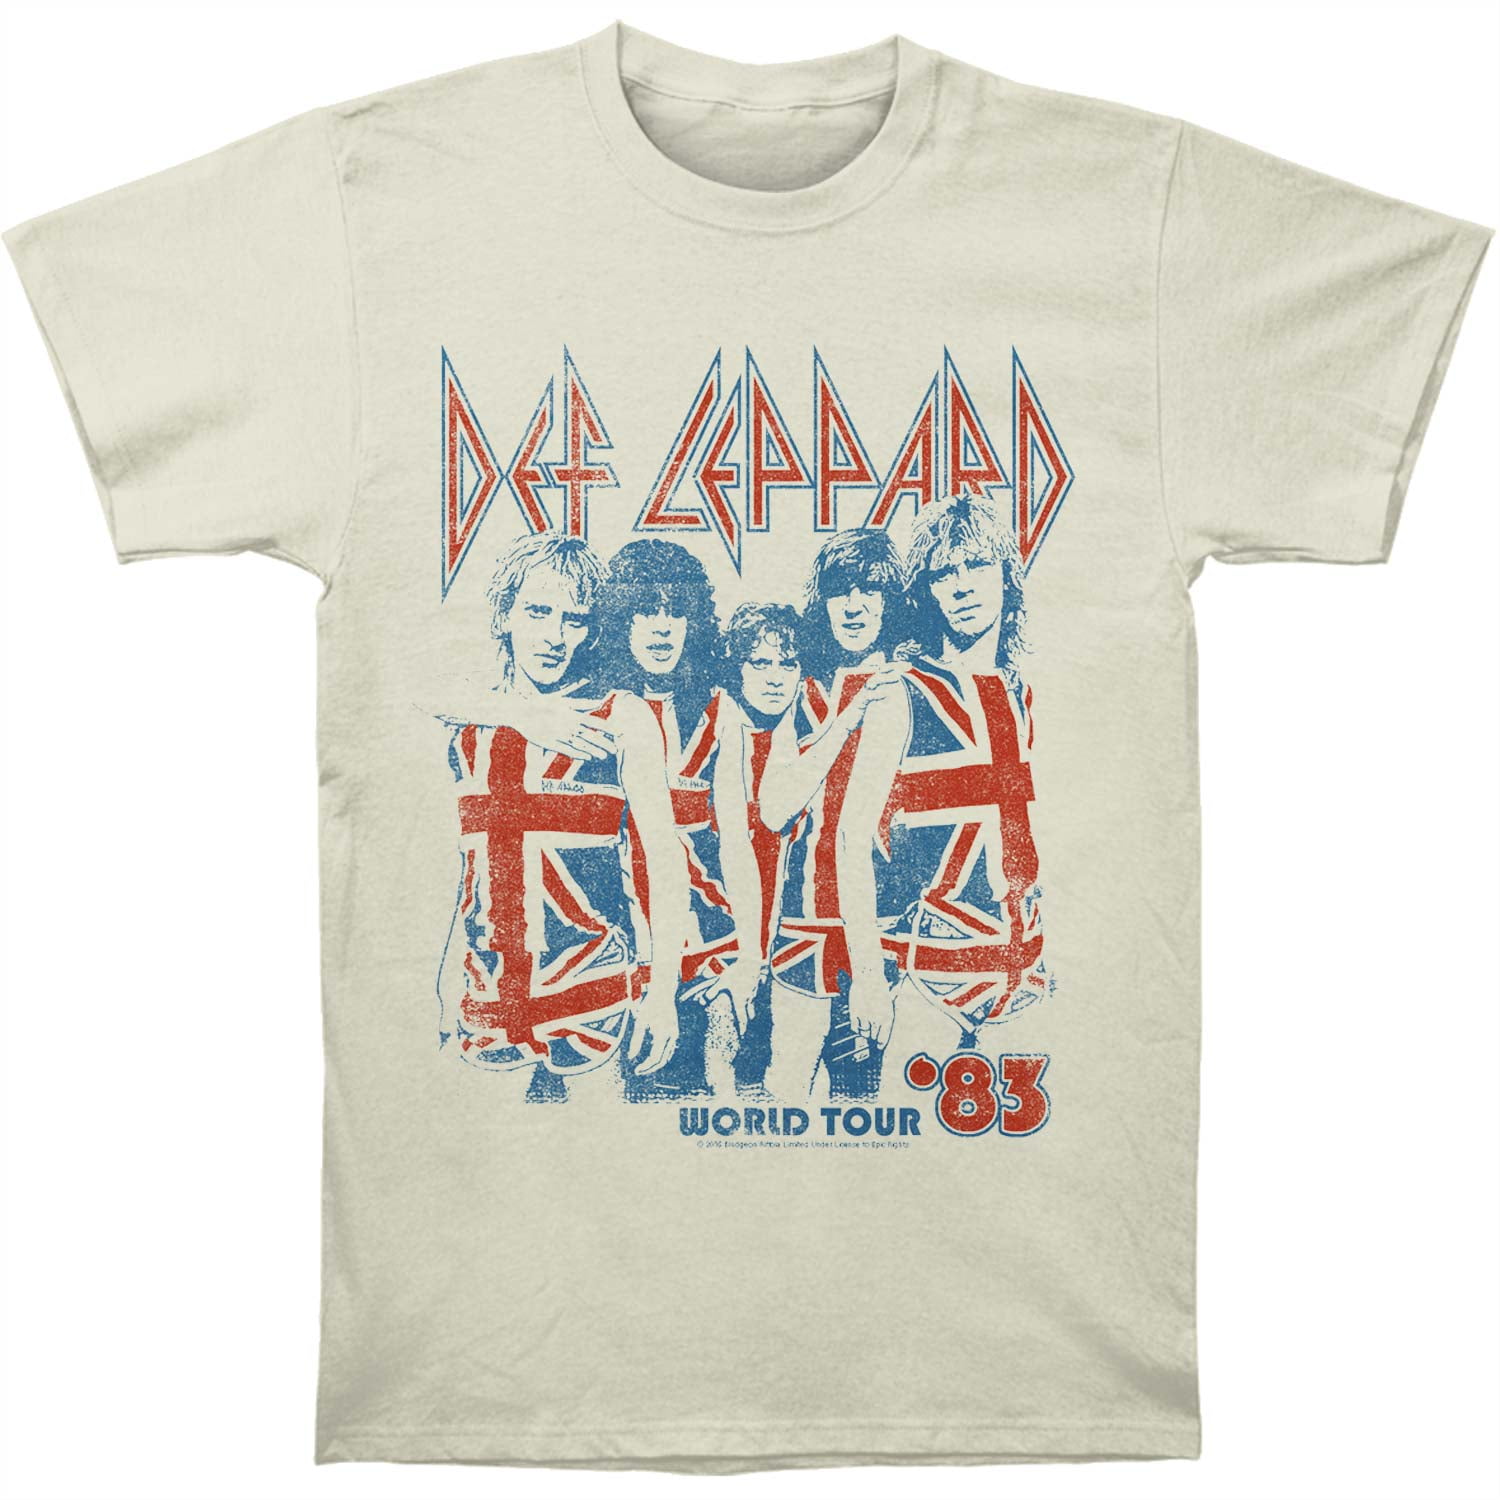 def leppard english rock band world tour '83 adult fitted jersey t ...